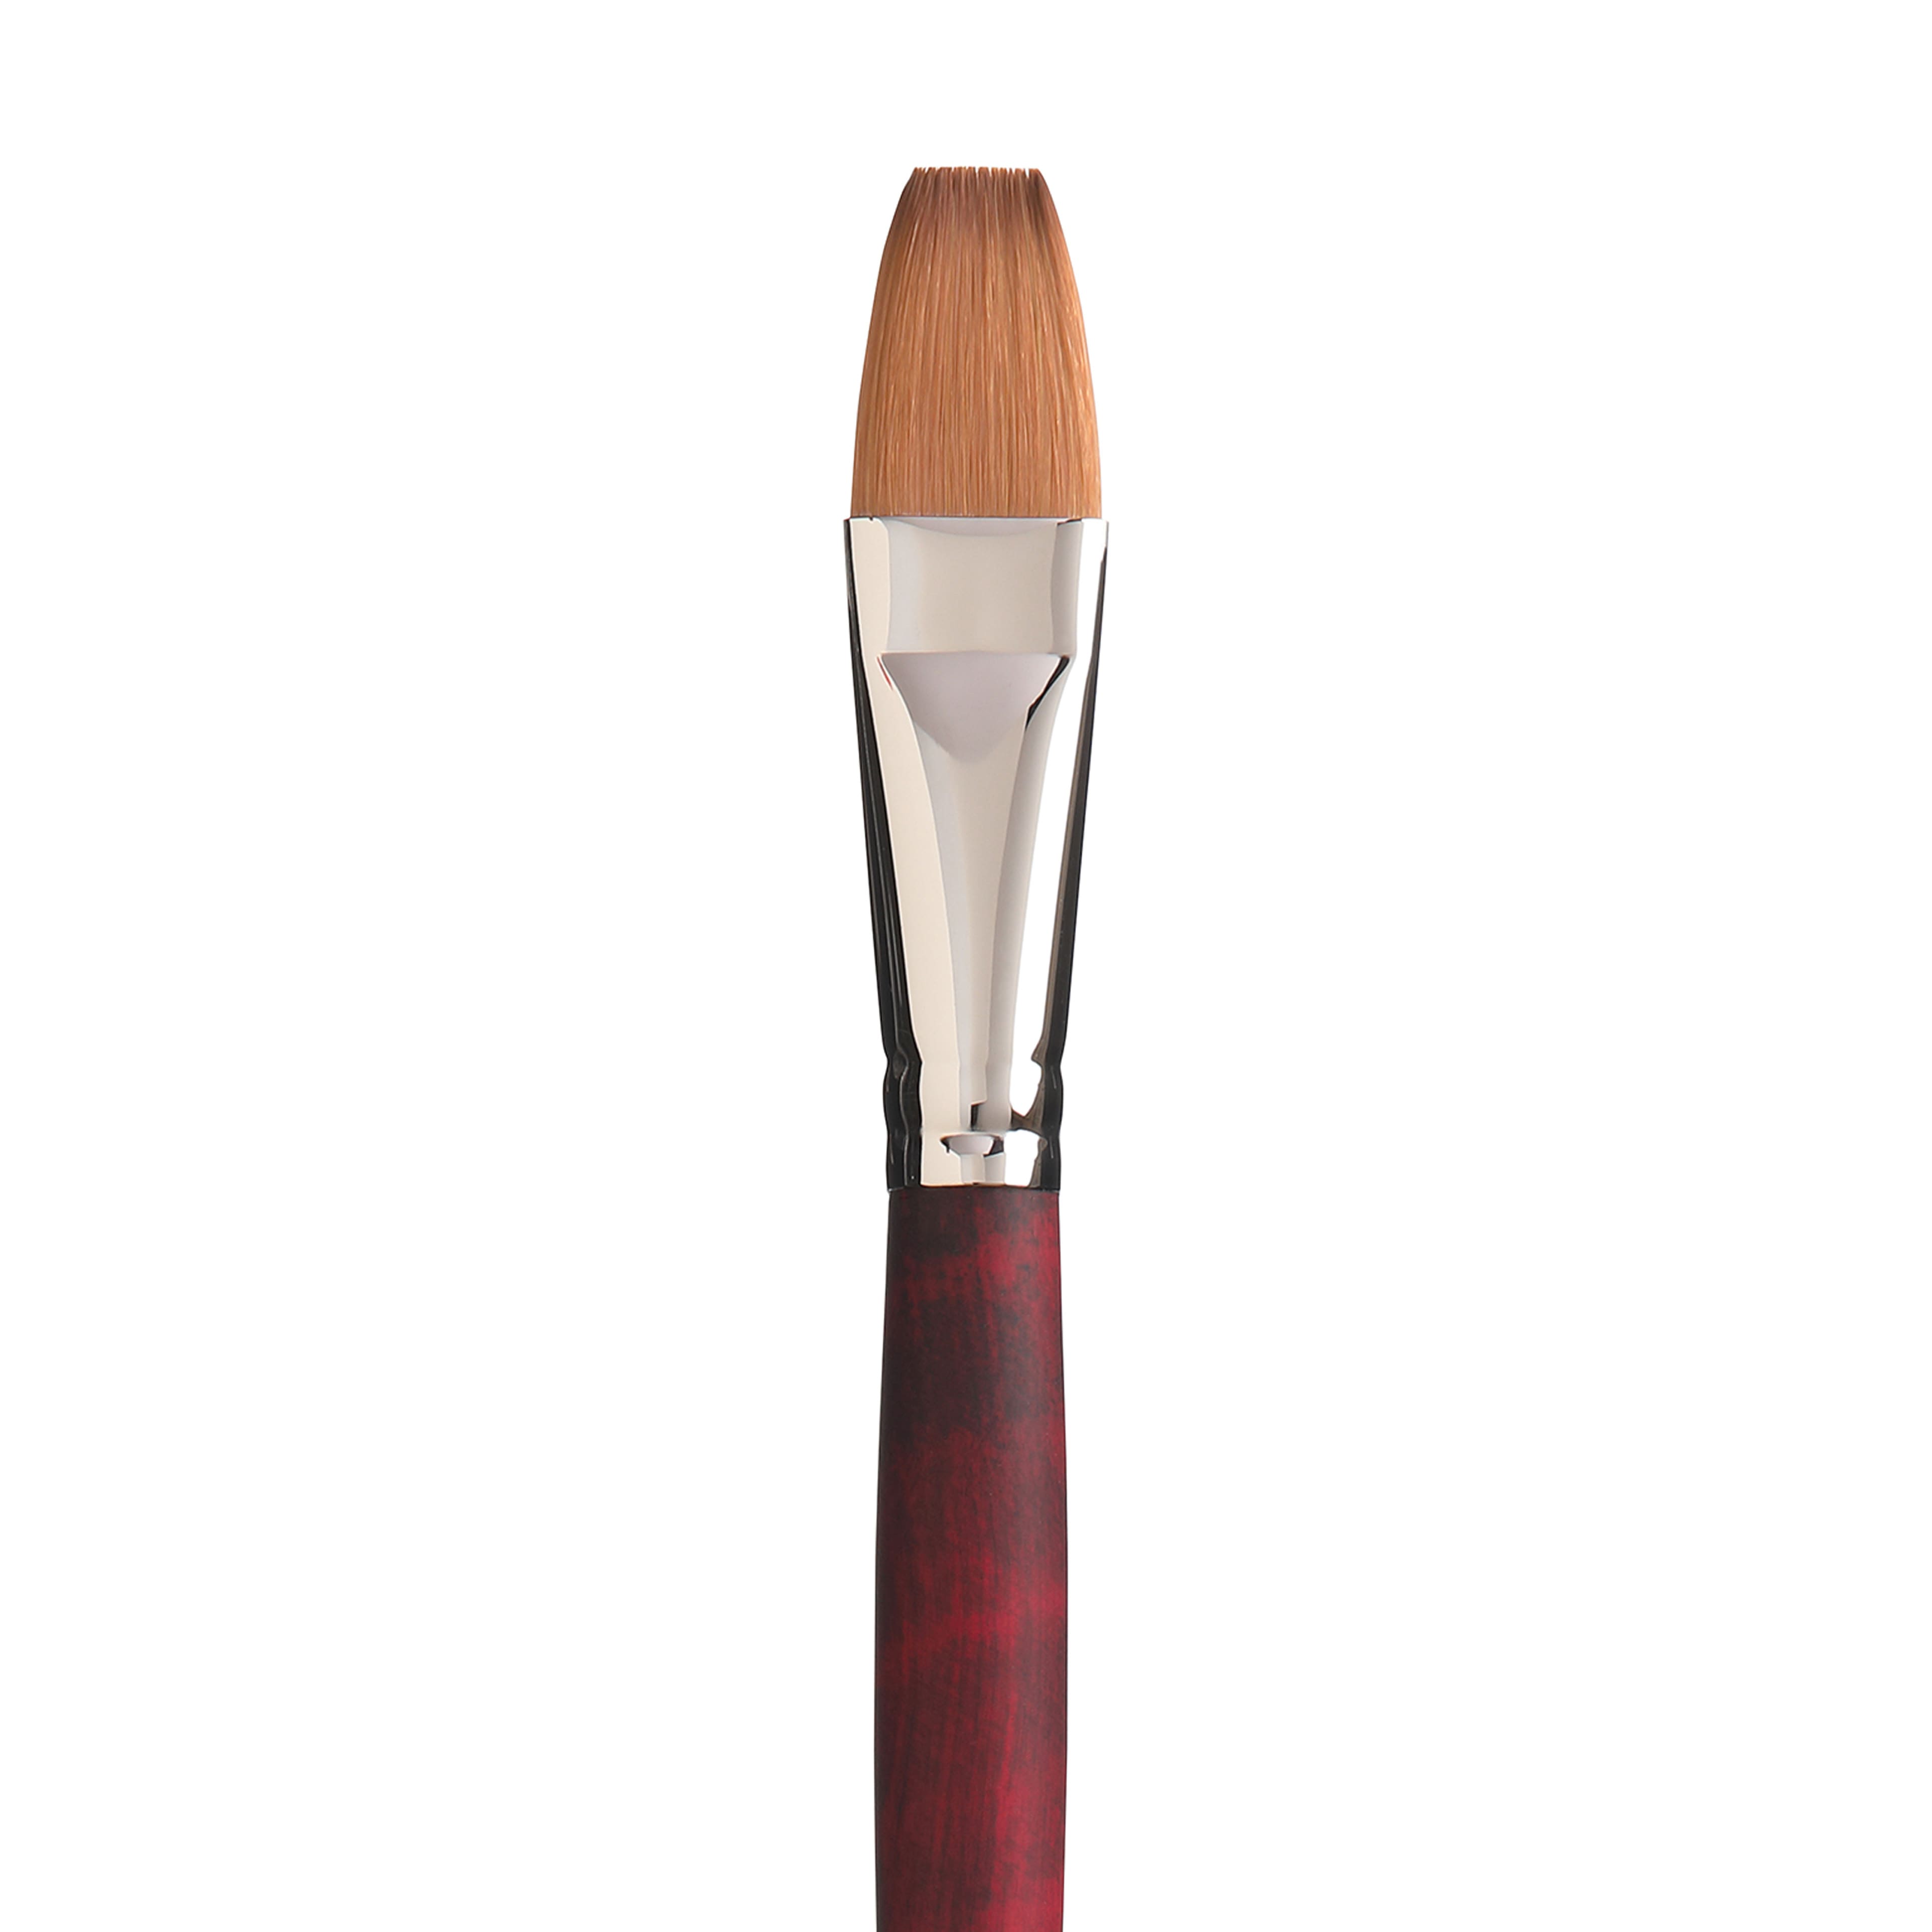 Princeton Velvetouch Series 3900 Synthetic Brush - Filbert, Long Handle, Size 10